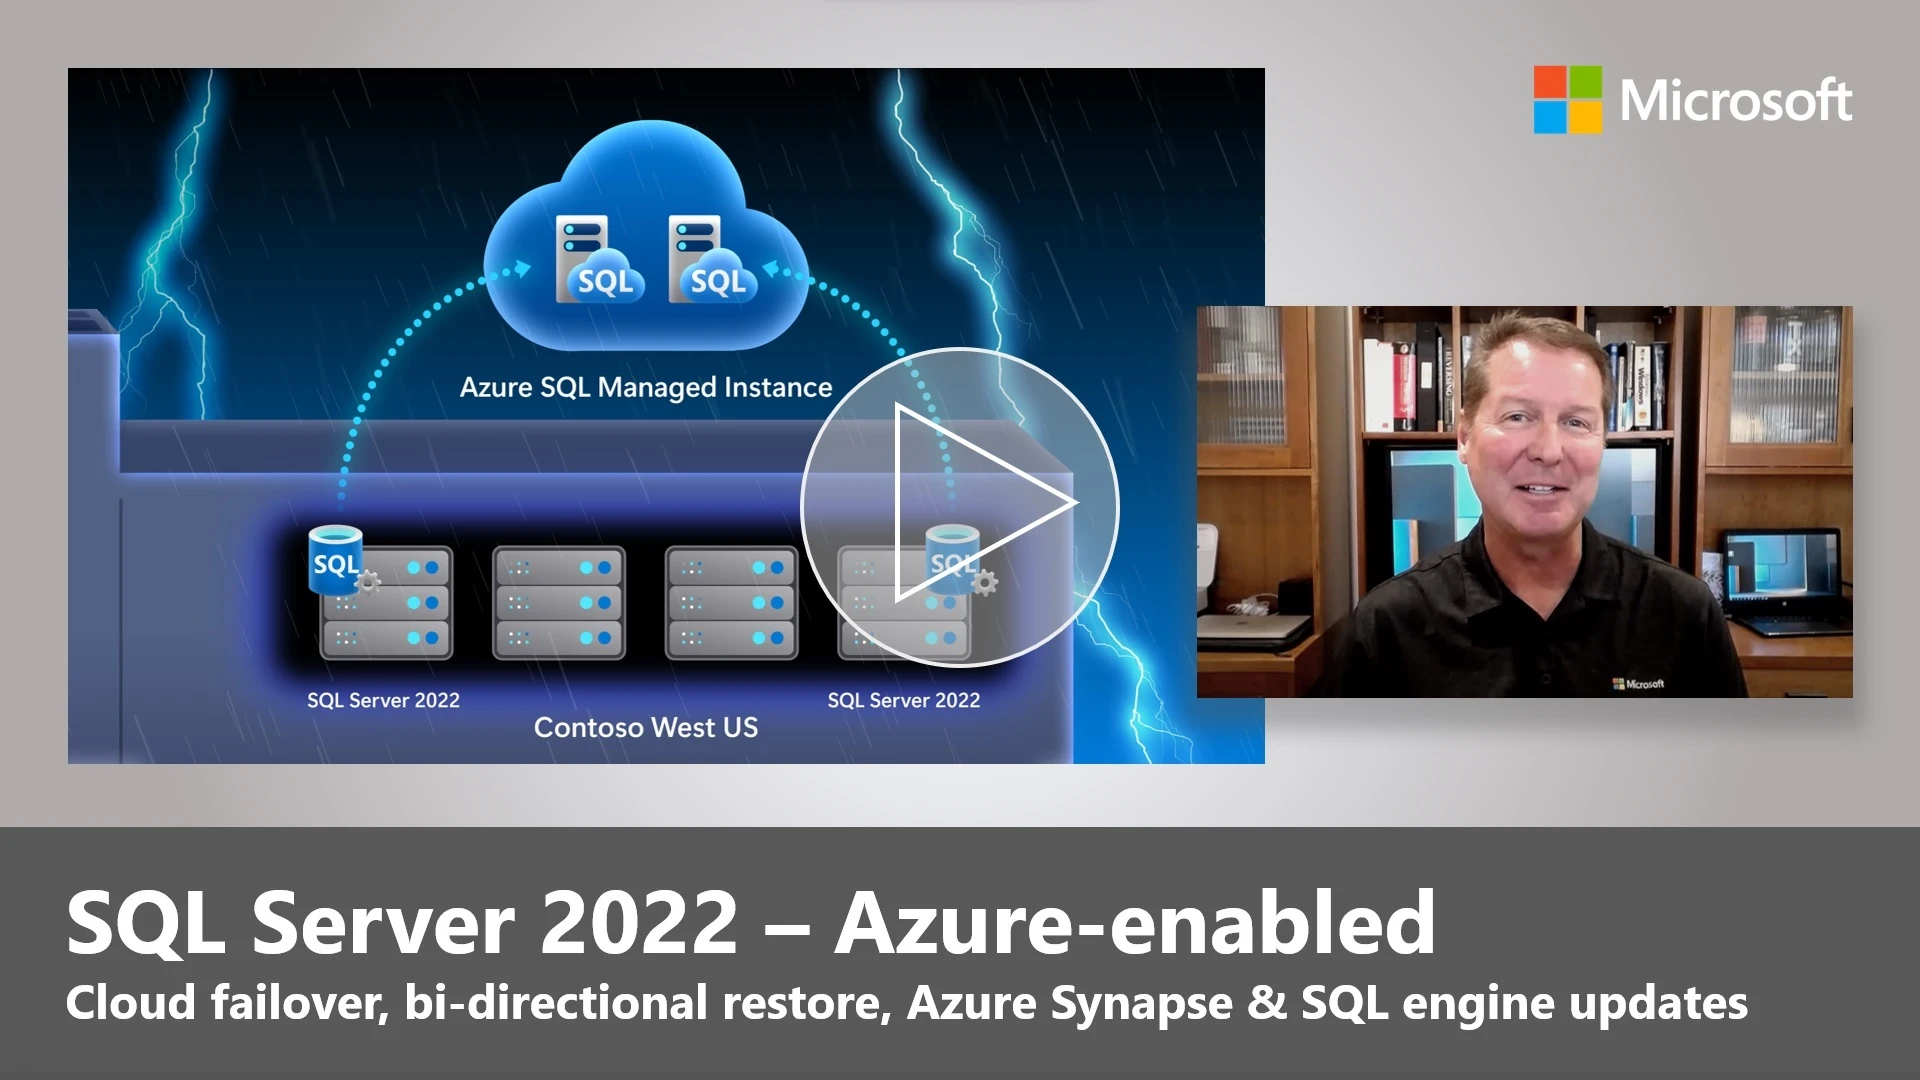 Watch the video to learn more about what's next for SQL Server 2022